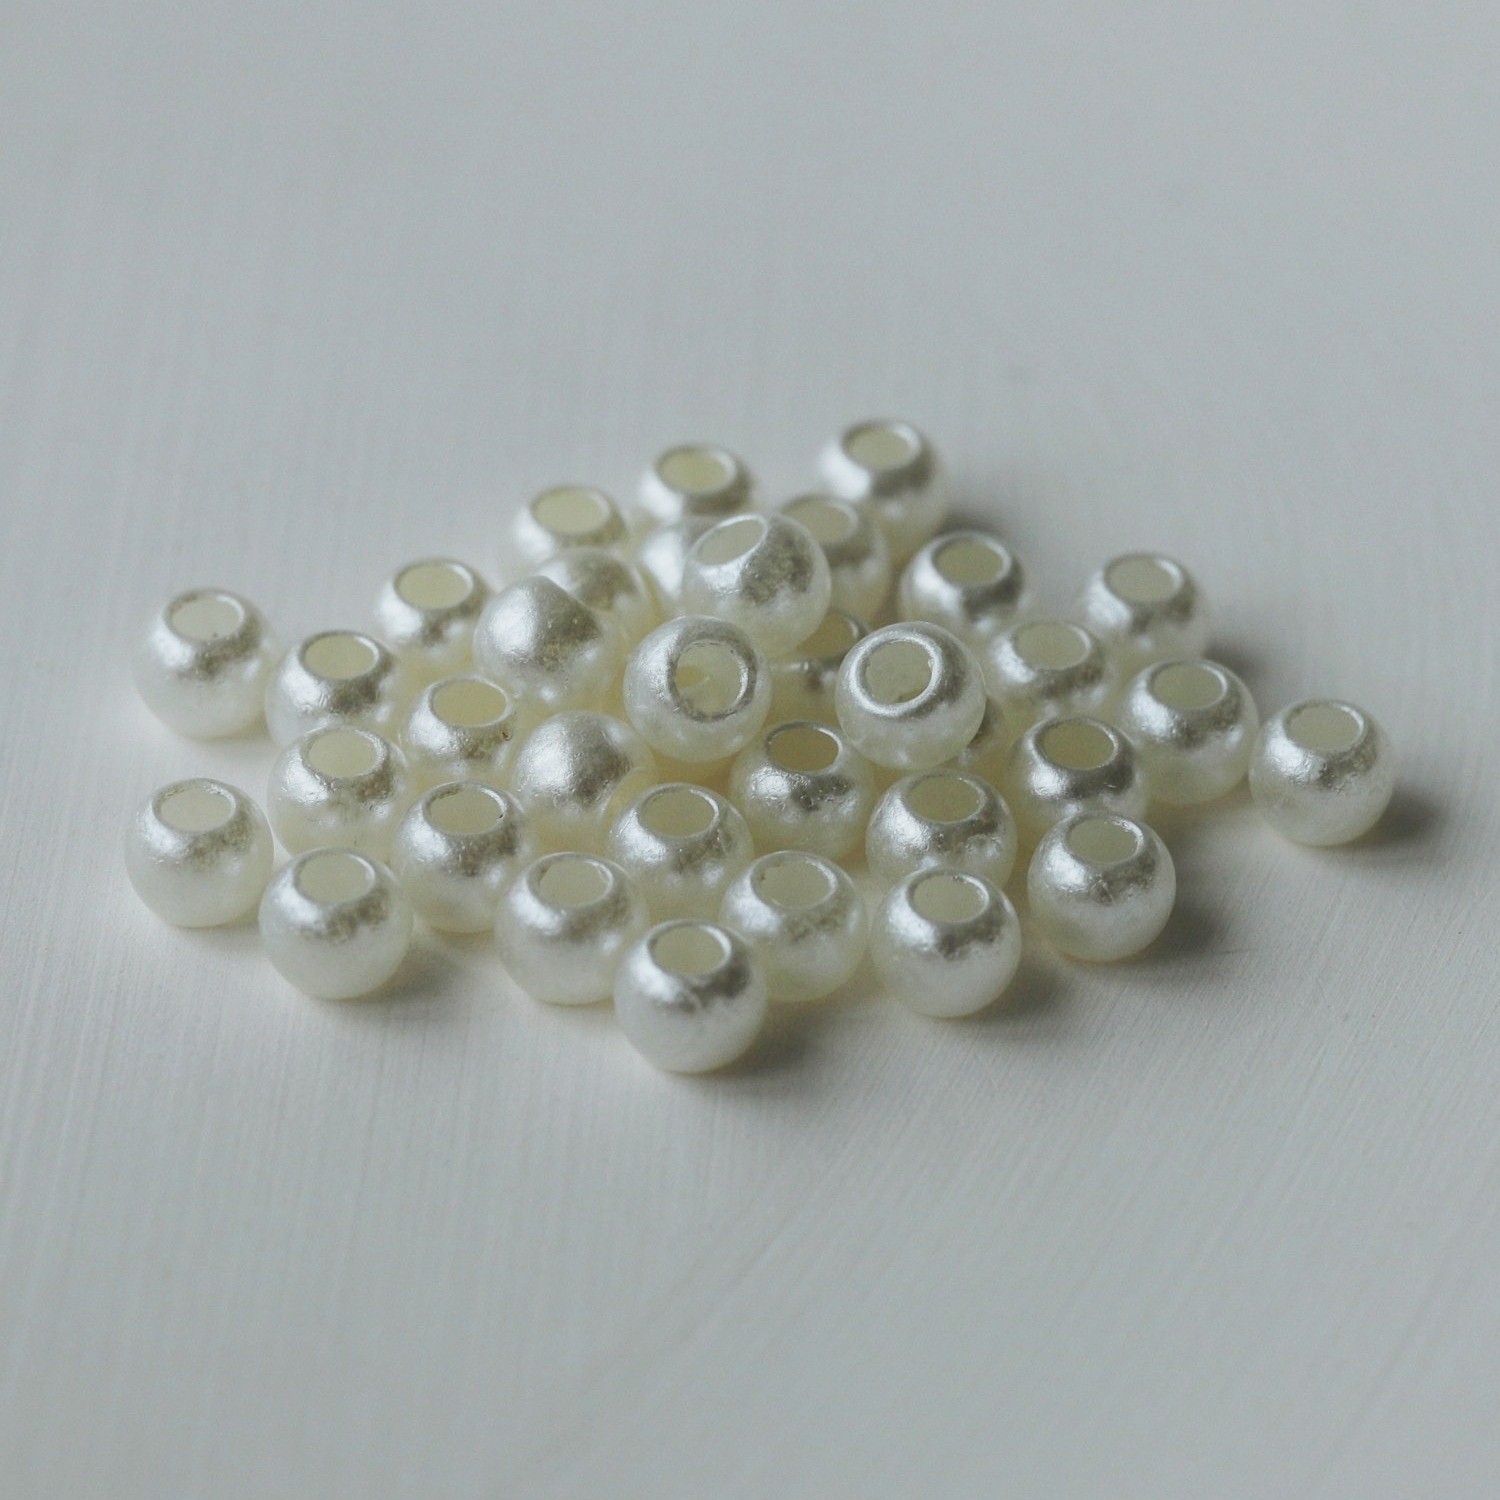 Round 4mm169 Machine Plastic Beads For Embroidery